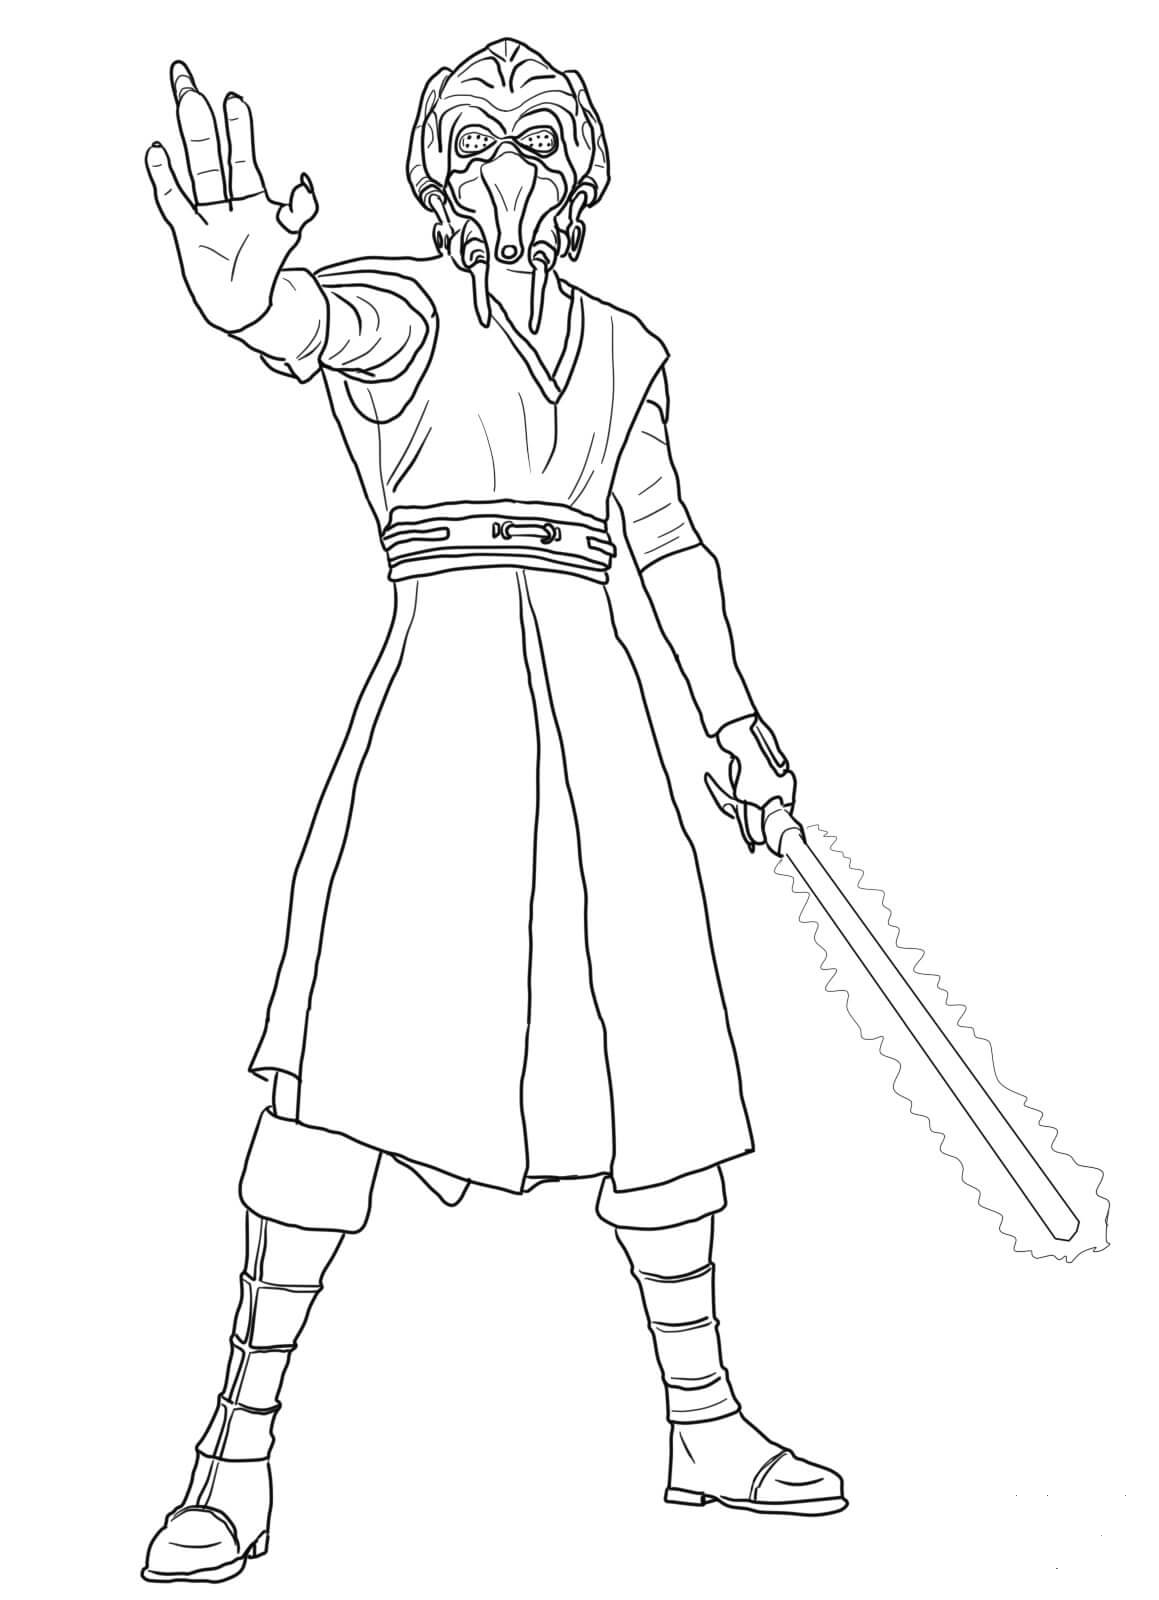 Plo Koon coloring page - ColouringPages